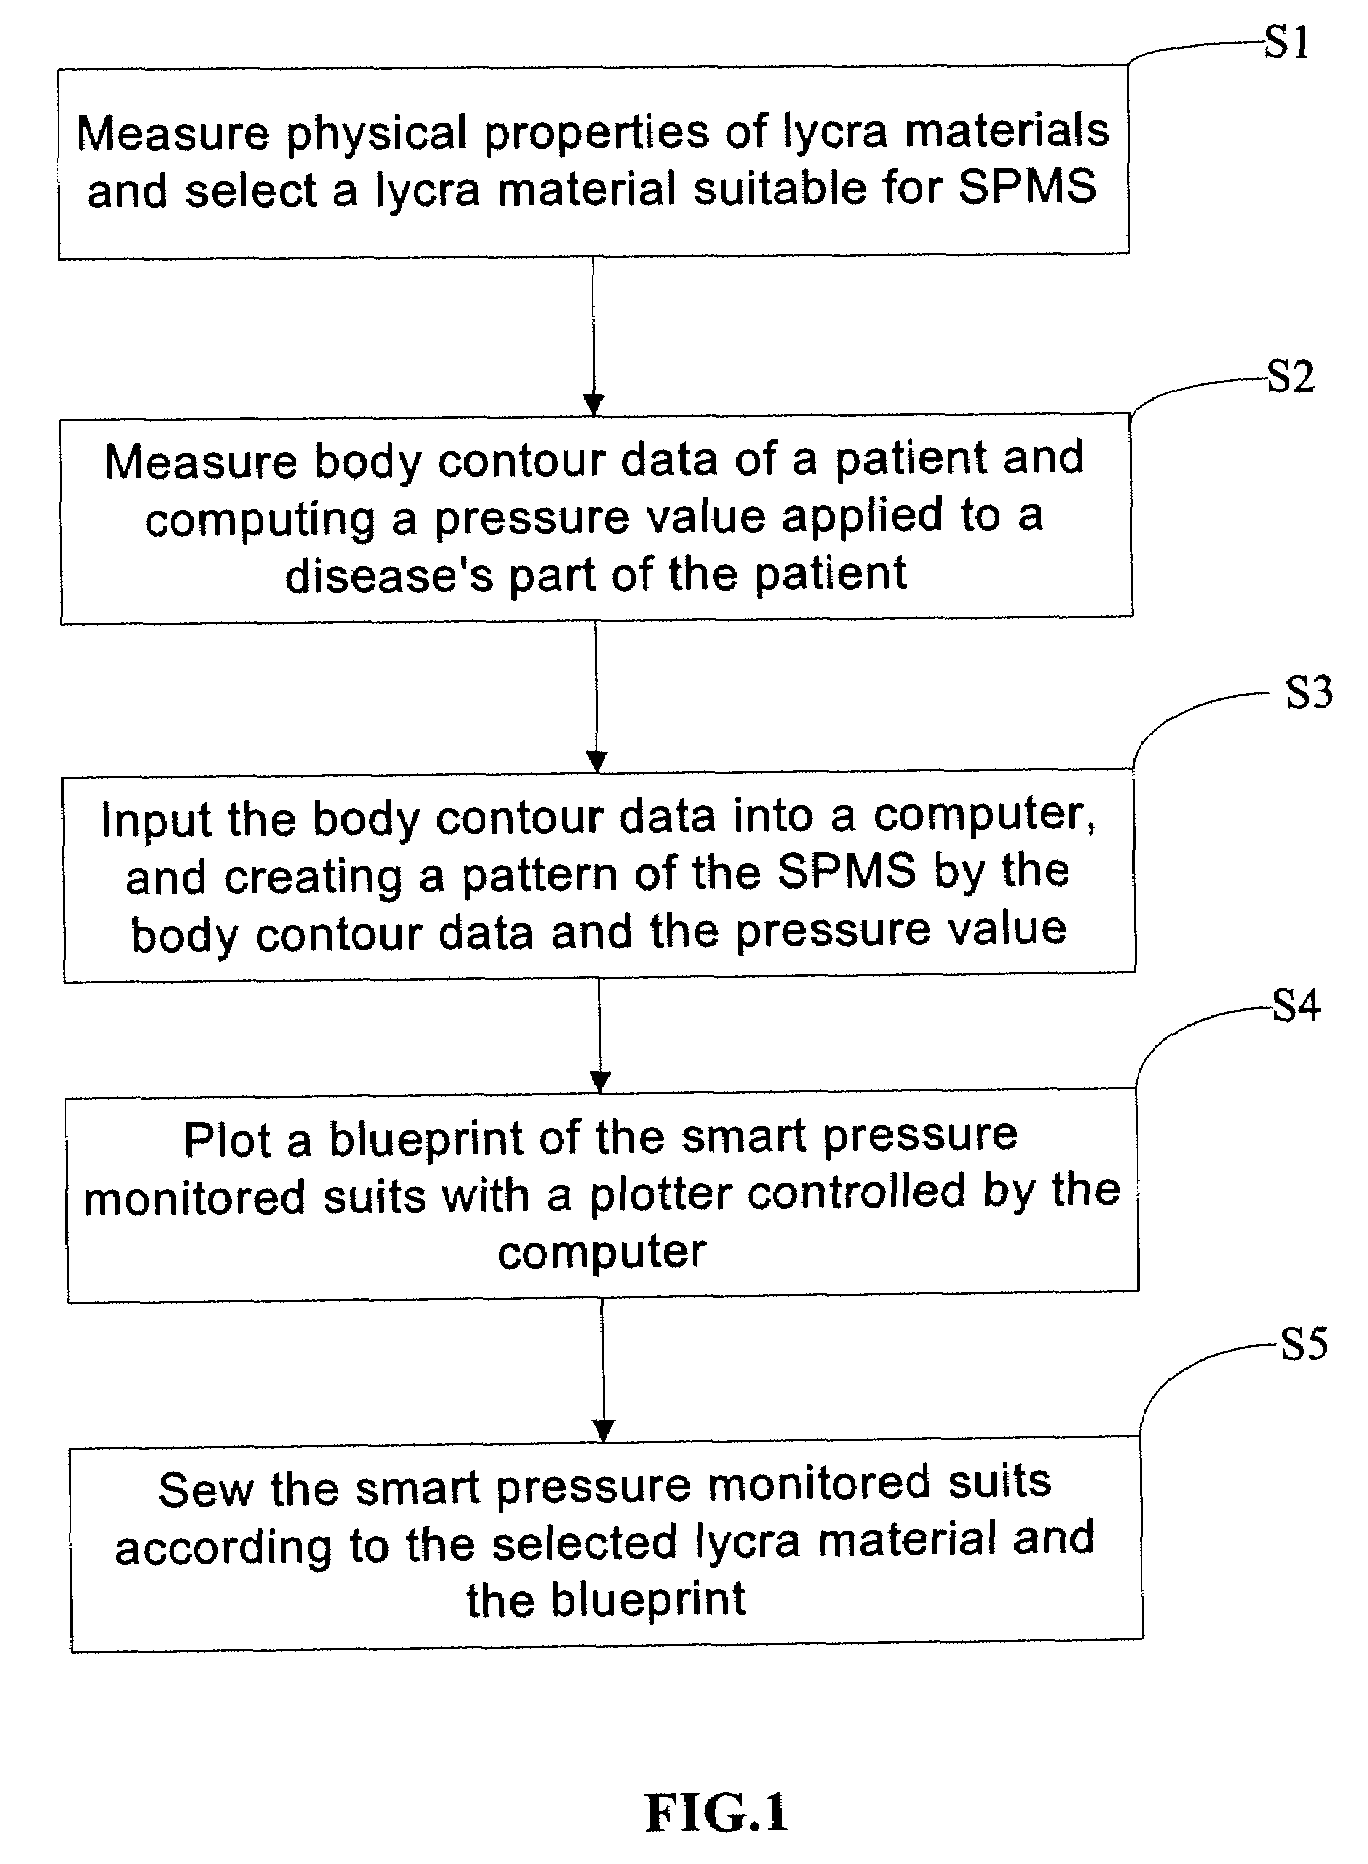 Method for manufacturing smart pressure monitored suits